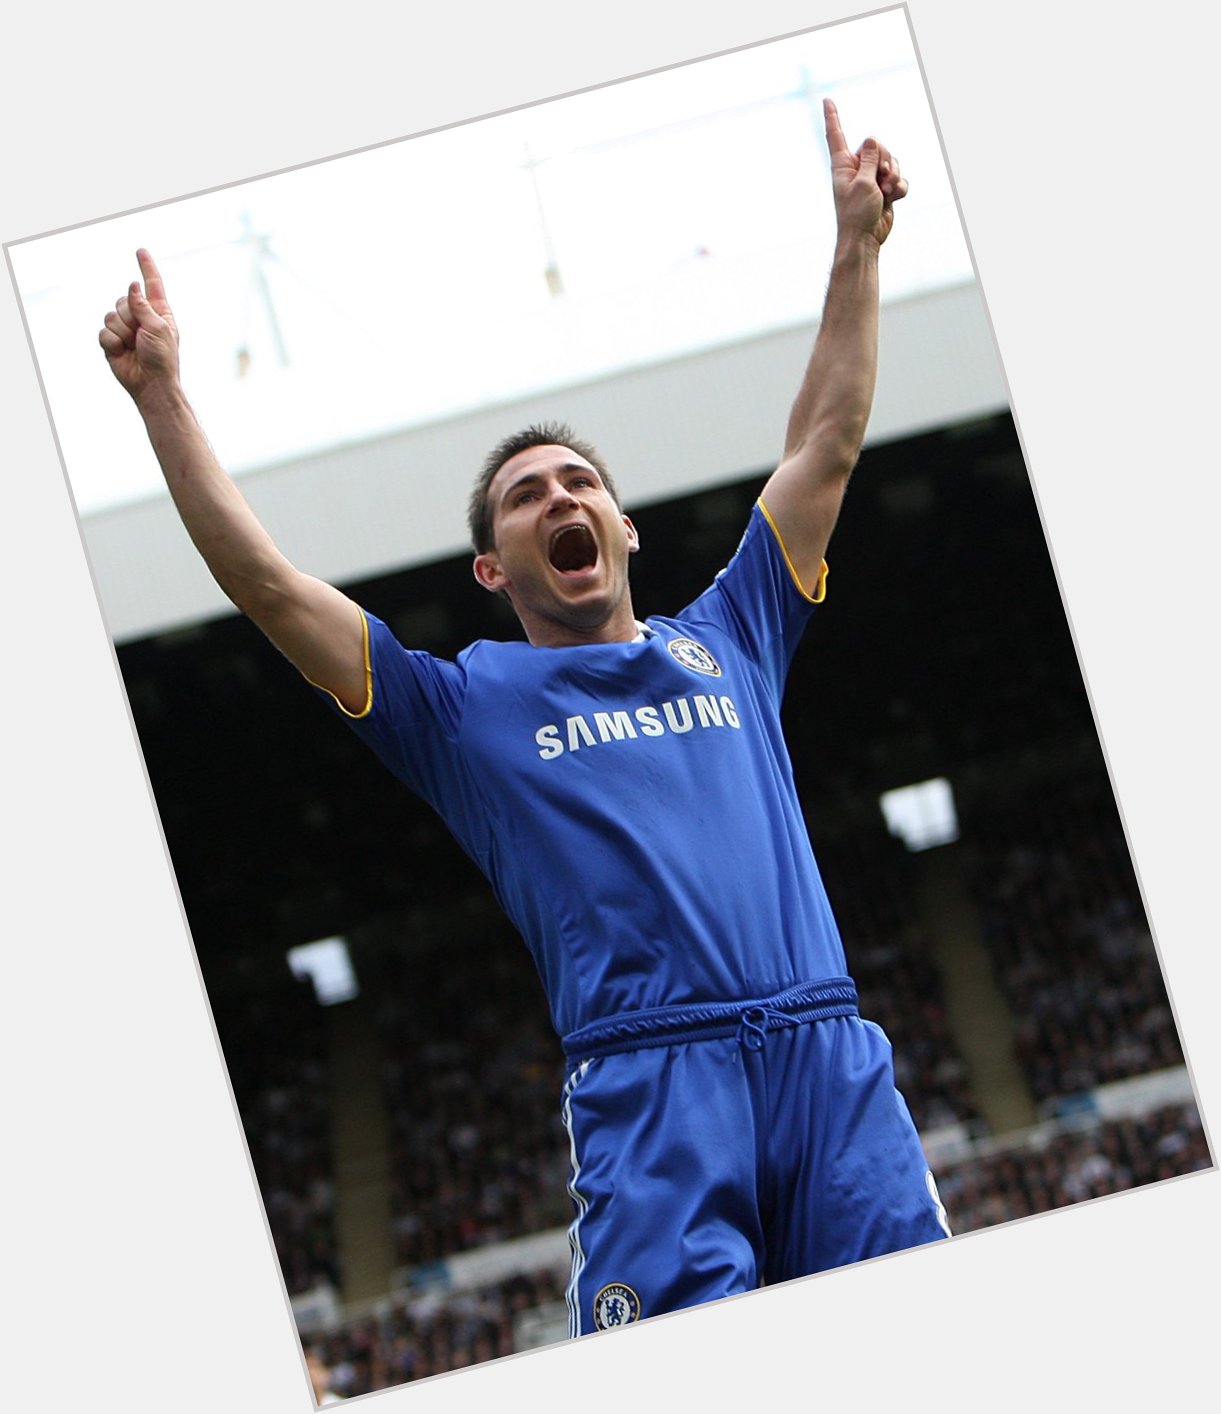 Happy Birthday to Frank Lampard! 913 games       106 caps 303 goals 13 trophies 

What a player! 